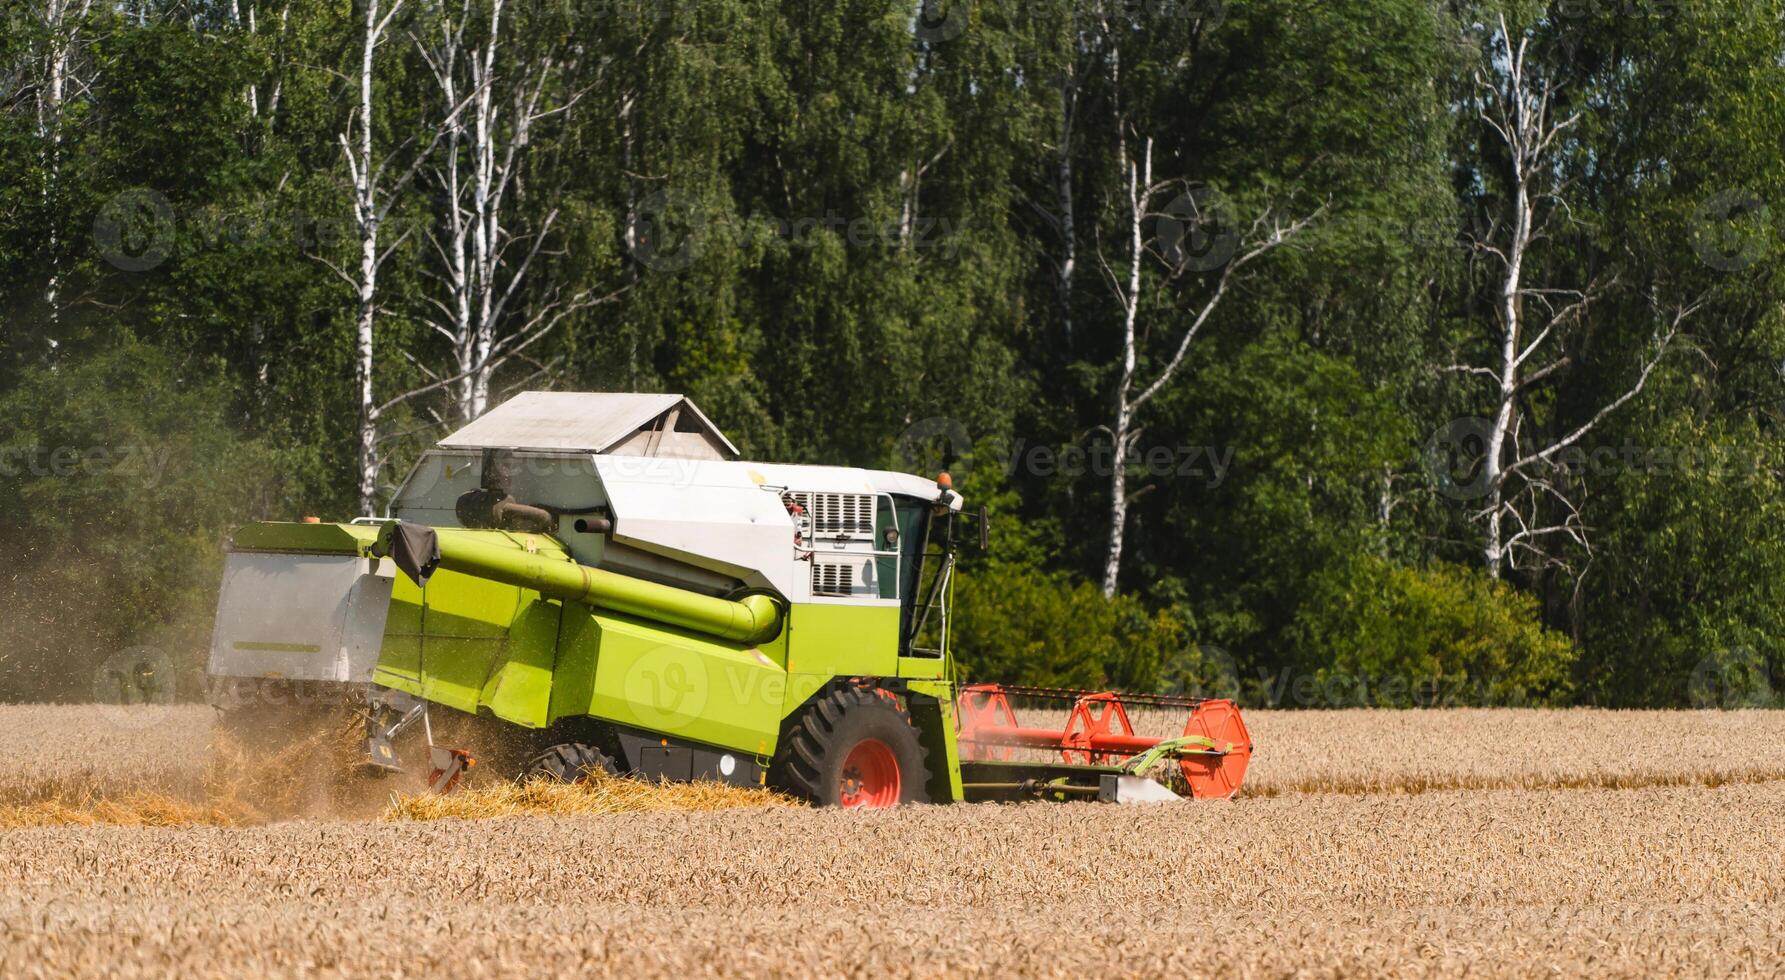 Combine harvester in action on wheat field. Process of gathering ripe crop from the fields. photo